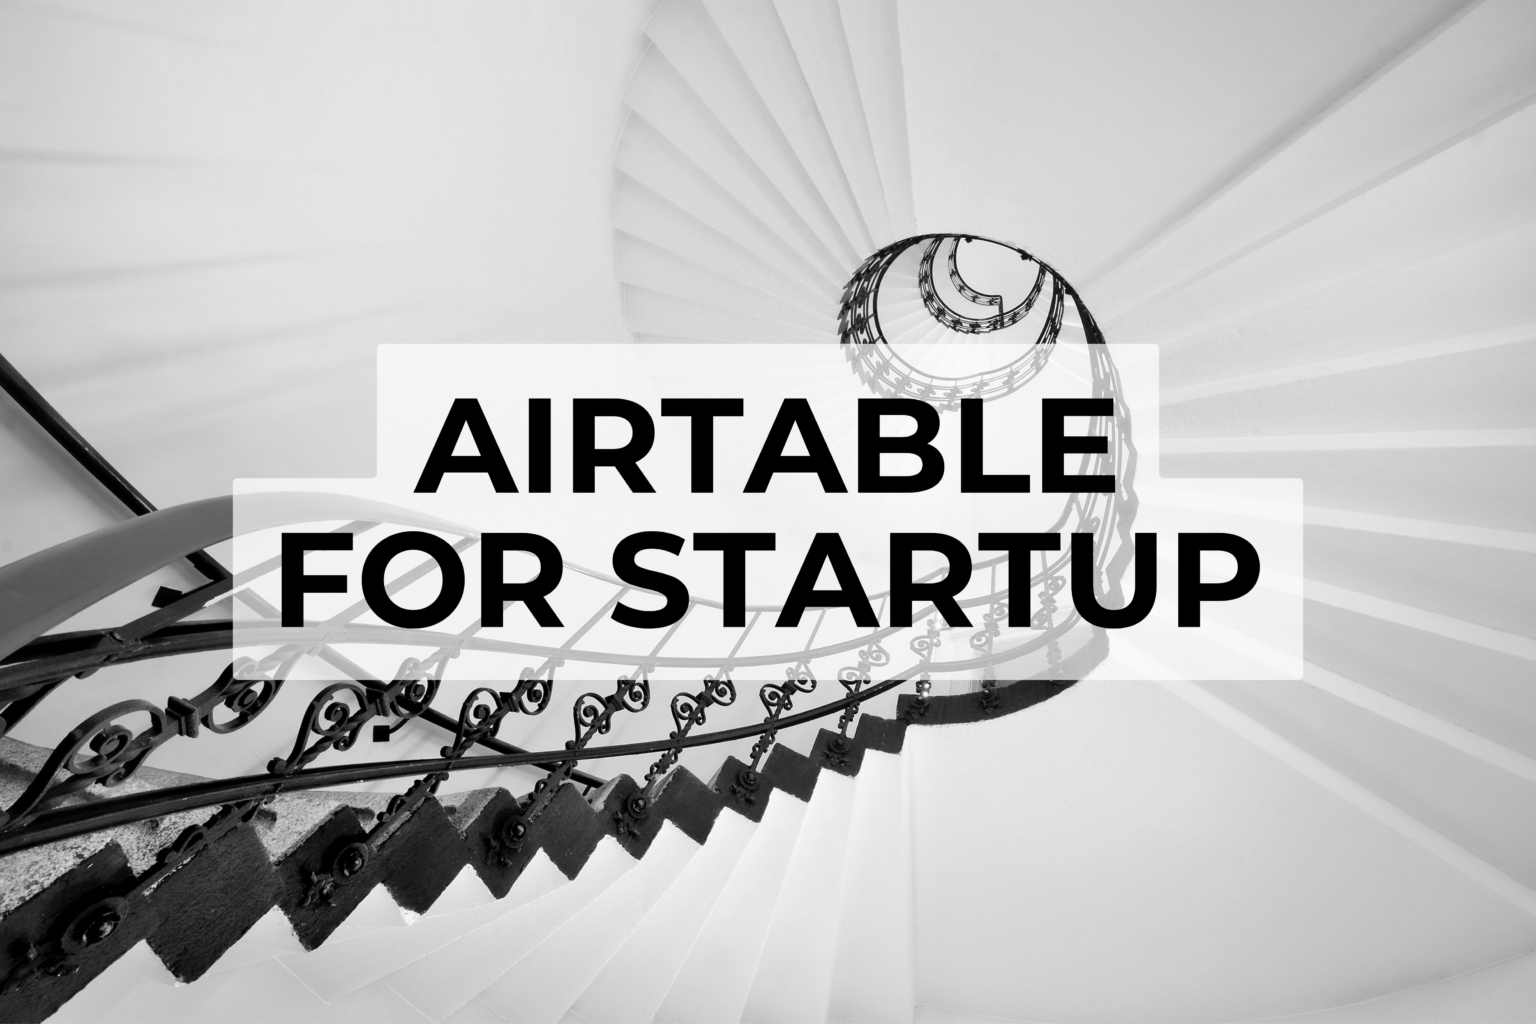 airtable for startup